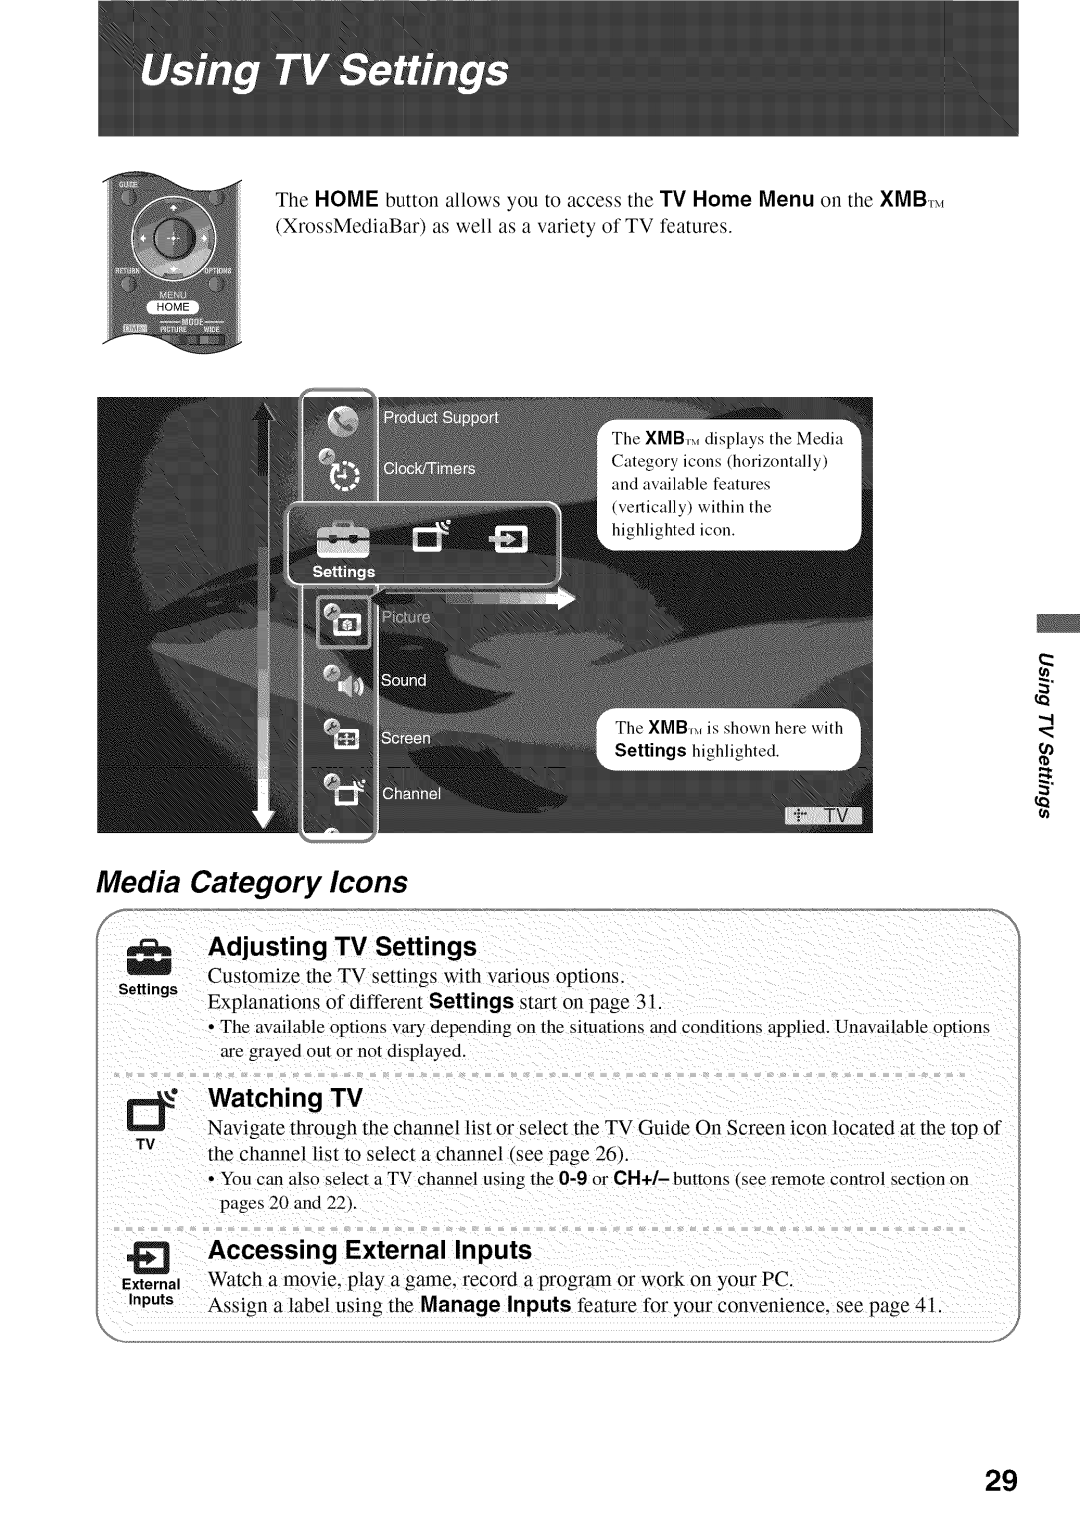 Sony KDL52V4100 operating instructions Media Category Icons, Accessing External Inputs, Adjusting TV Settings, Watching TV 